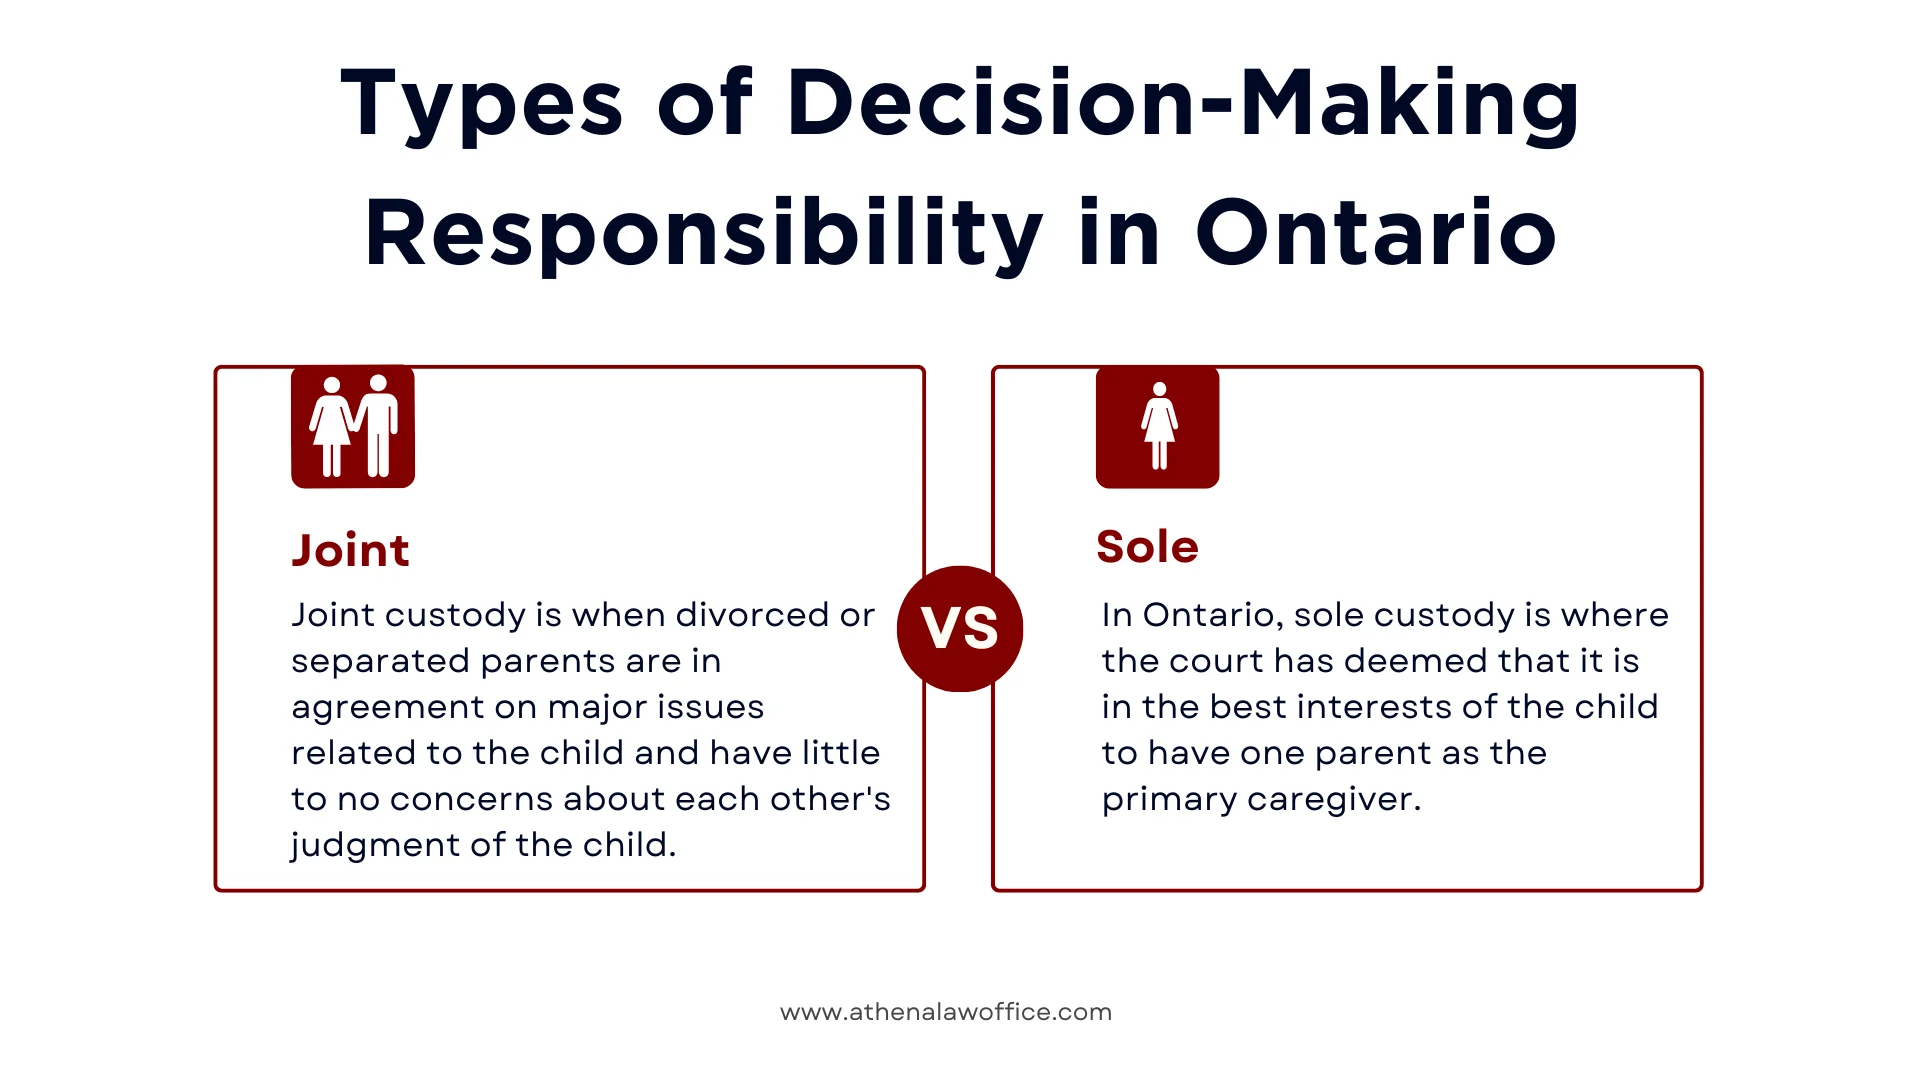 An infographic on the types of decision-making responsibility in Ontario